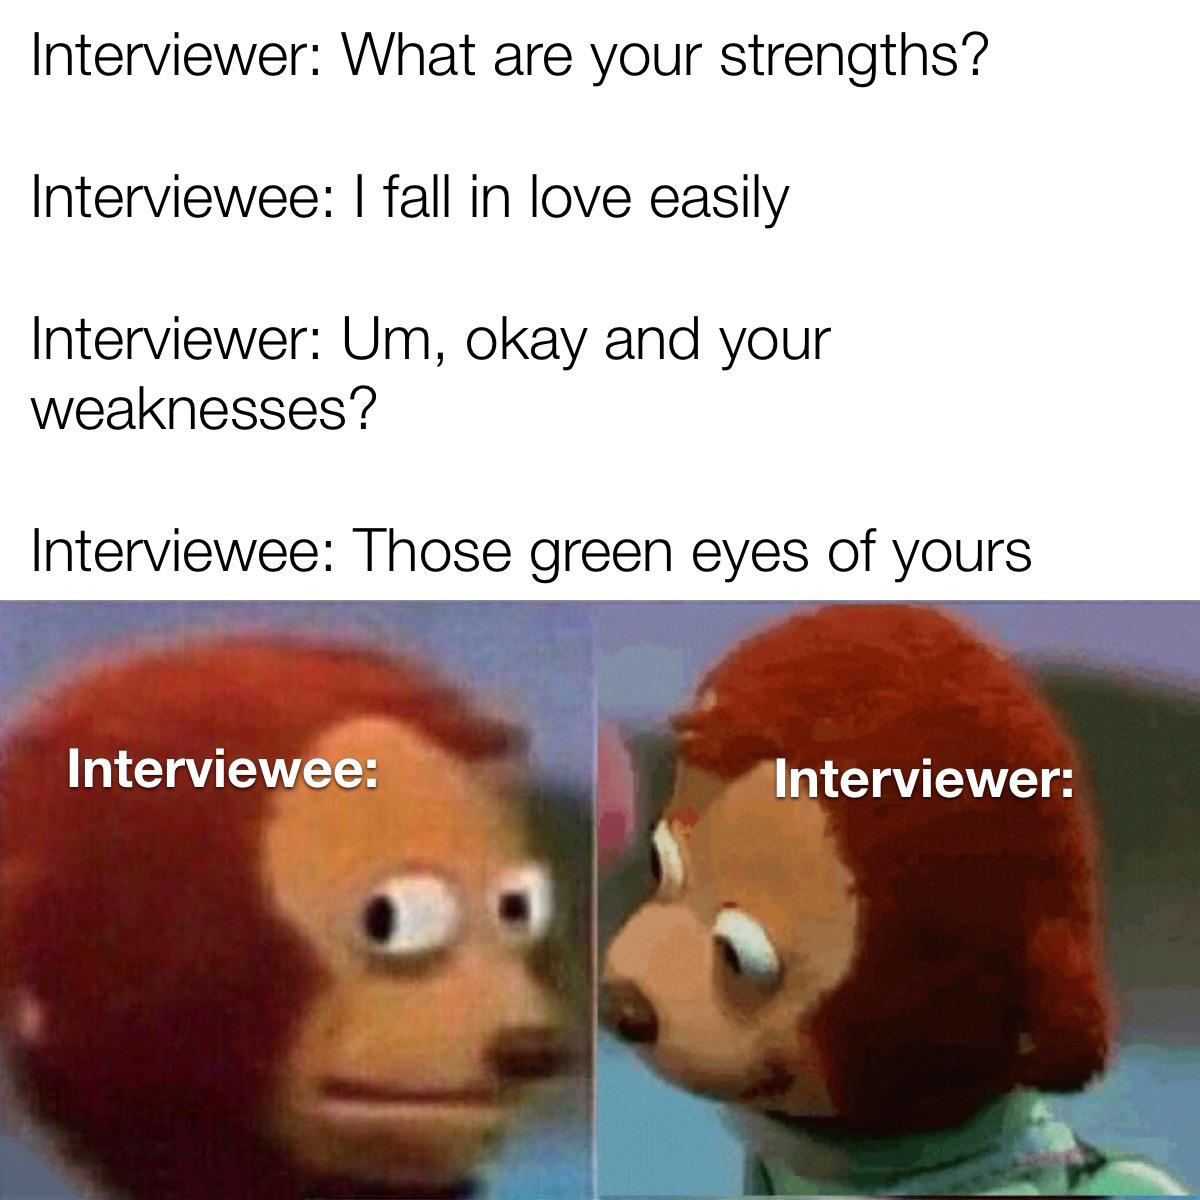 dank memes - america is the world's florida - Interviewer What are your strengths? Interviewee I fall in love easily Interviewer Um, okay and your weaknesses? Interviewee Those green eyes of yours Interviewee Interviewer